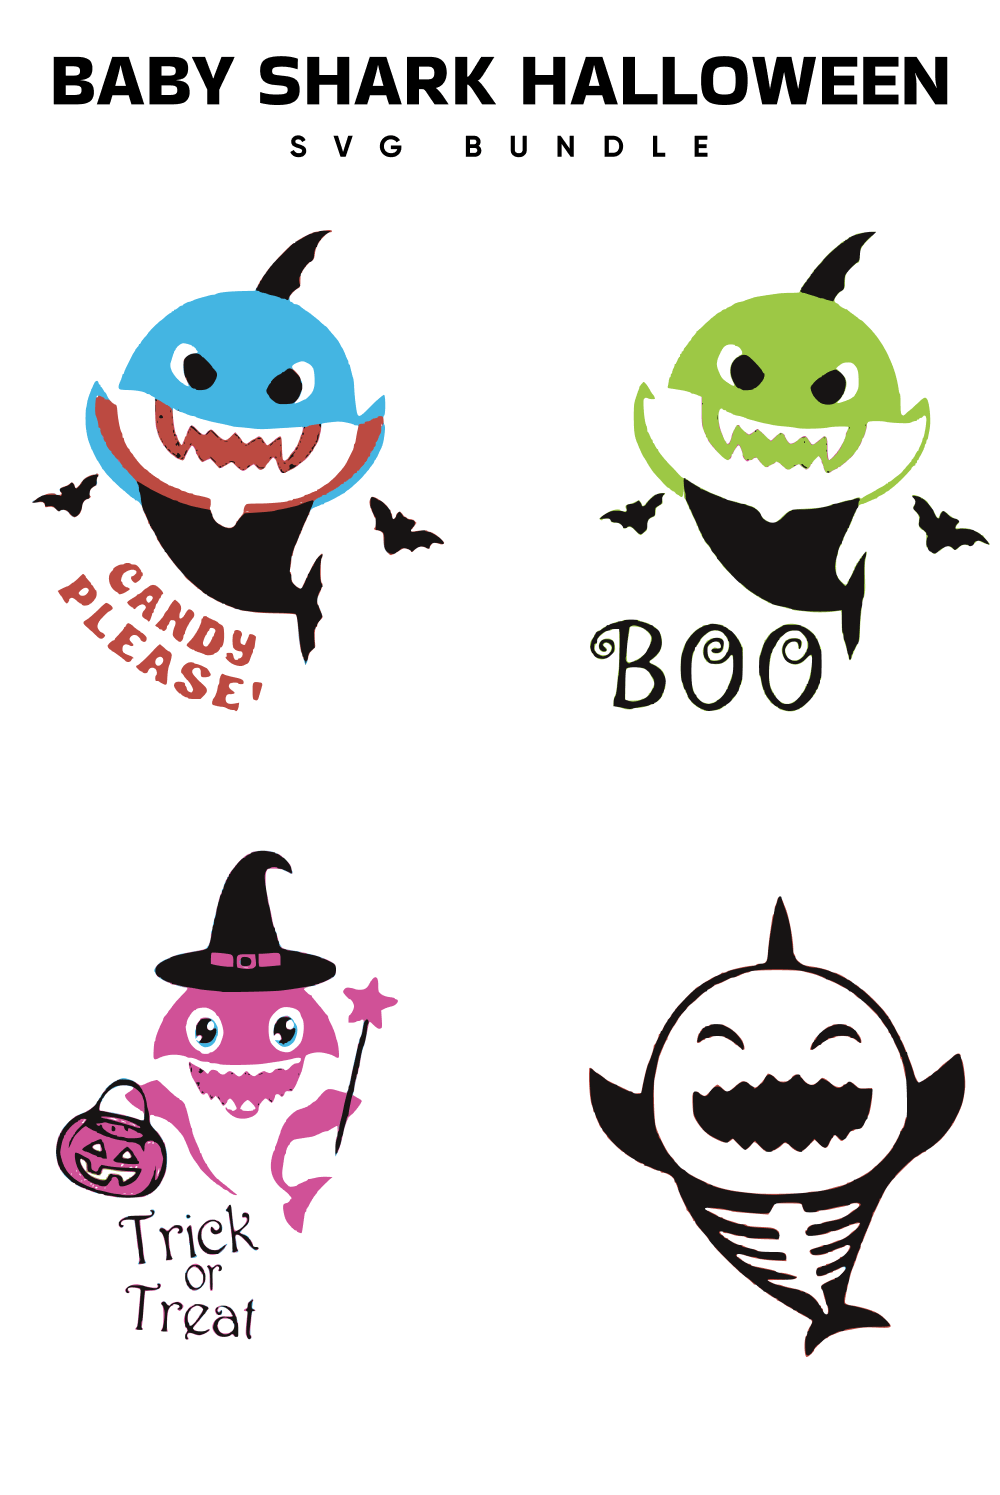 Blue, green, pink and black sharks festively dressed for Halloween.